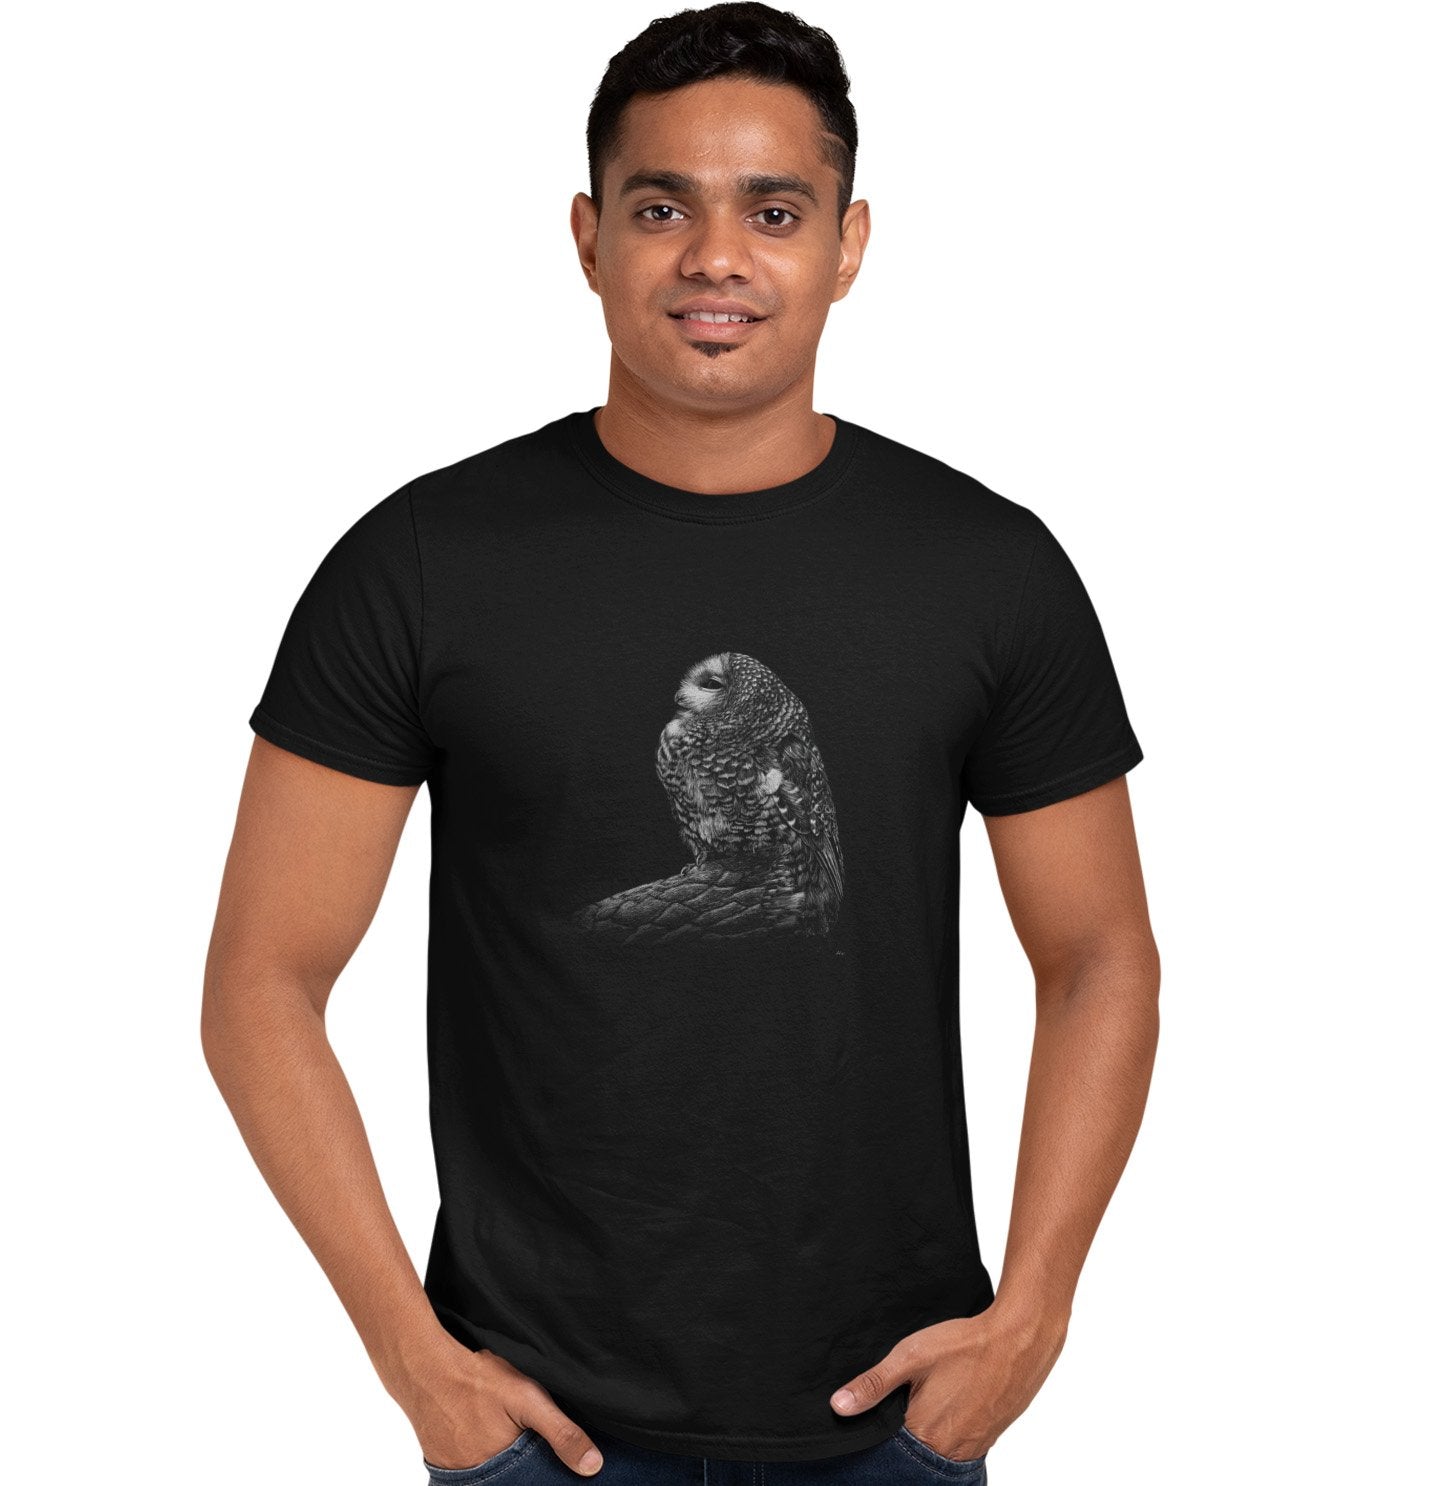 Spotted Owl on Black - Adult Unisex T-Shirt